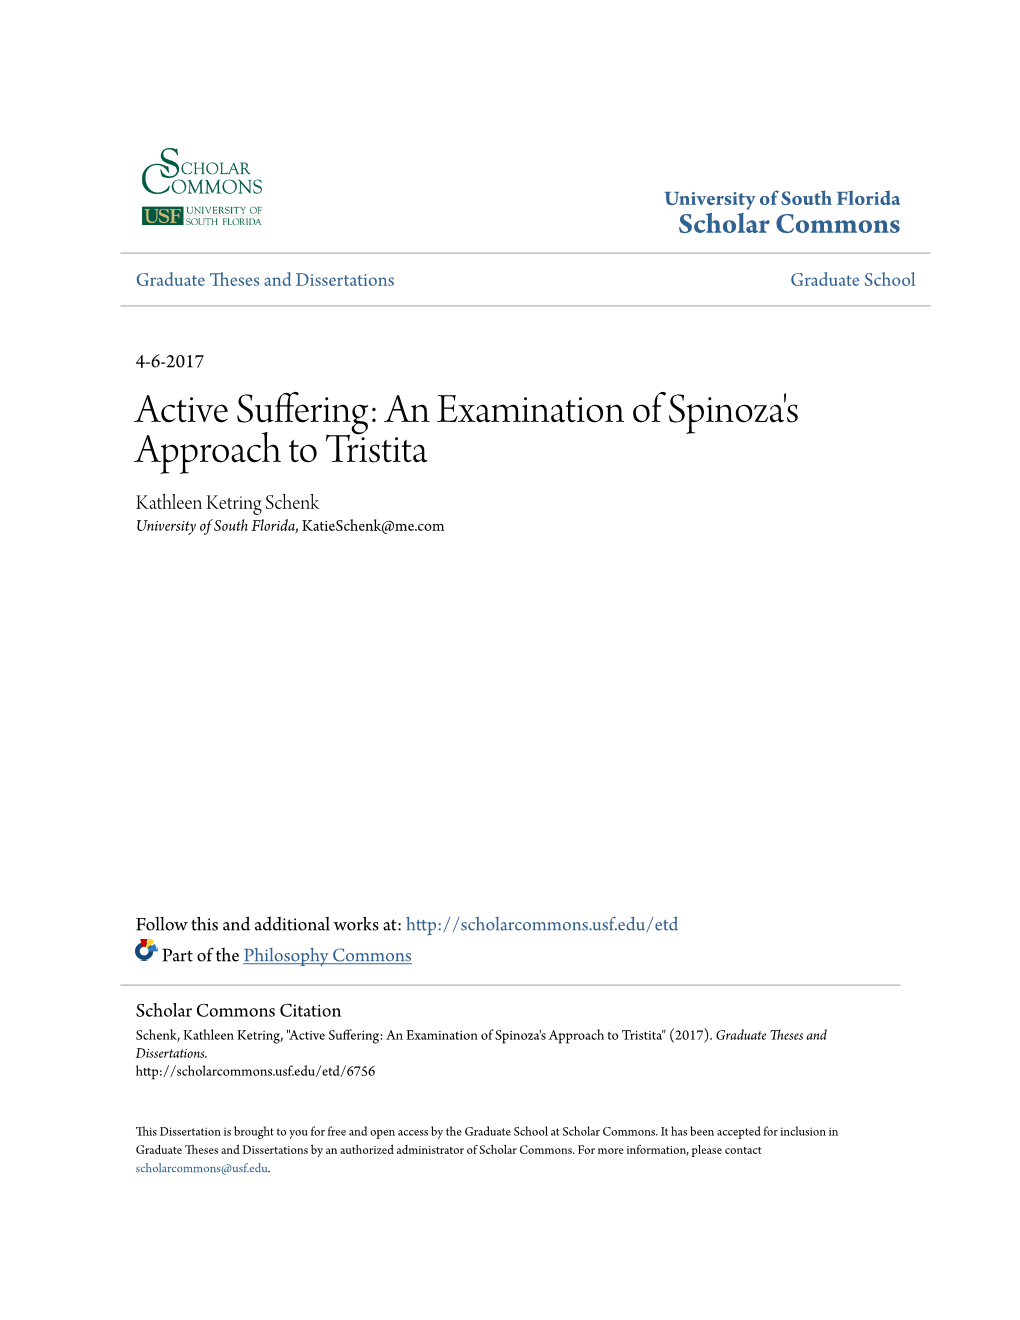 Active Suffering: an Examination of Spinoza's Approach to Tristita Kathleen Ketring Schenk University of South Florida, Katieschenk@Me.Com